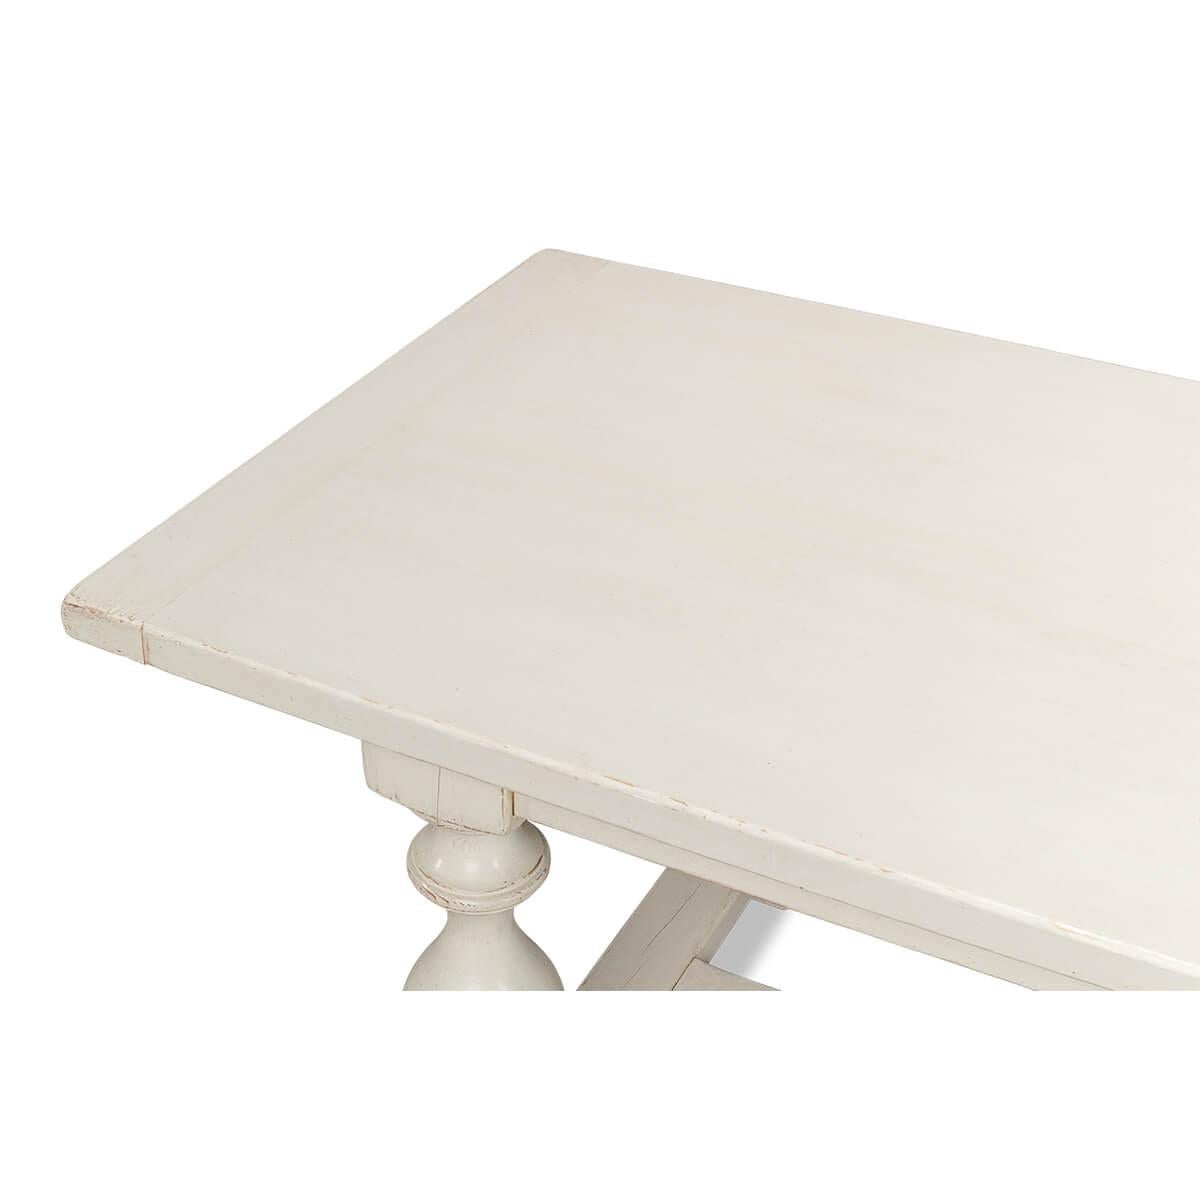 Contemporary English Country Antique White Dining Table For Sale